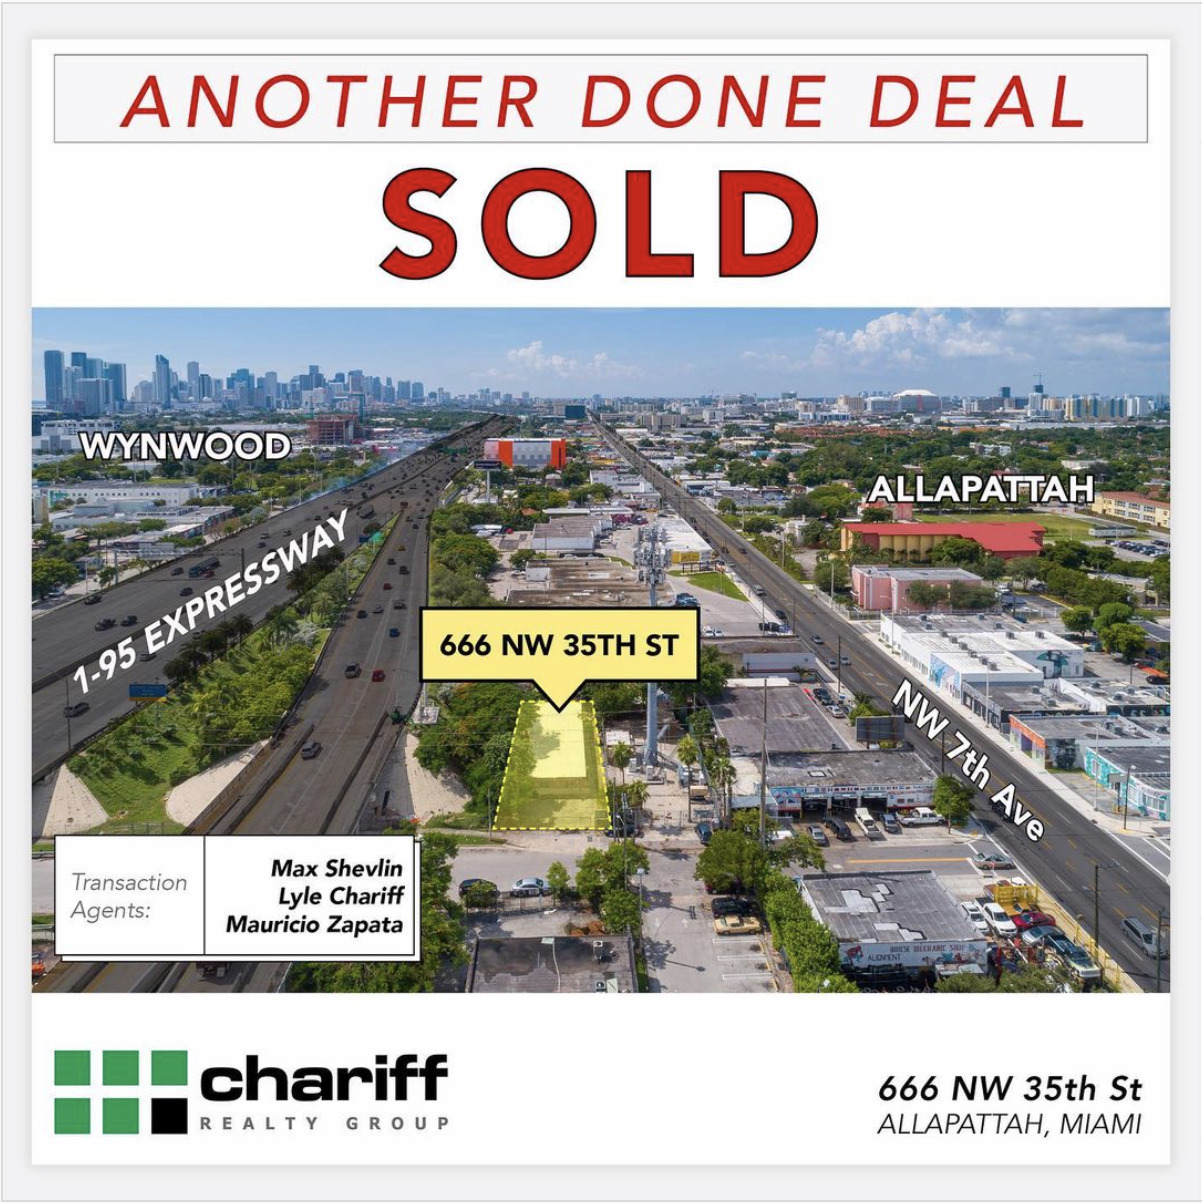 666 NW 35th St - Allapattah - Miami - Florida - Another Done Deal Sold - Chariff Realty Group